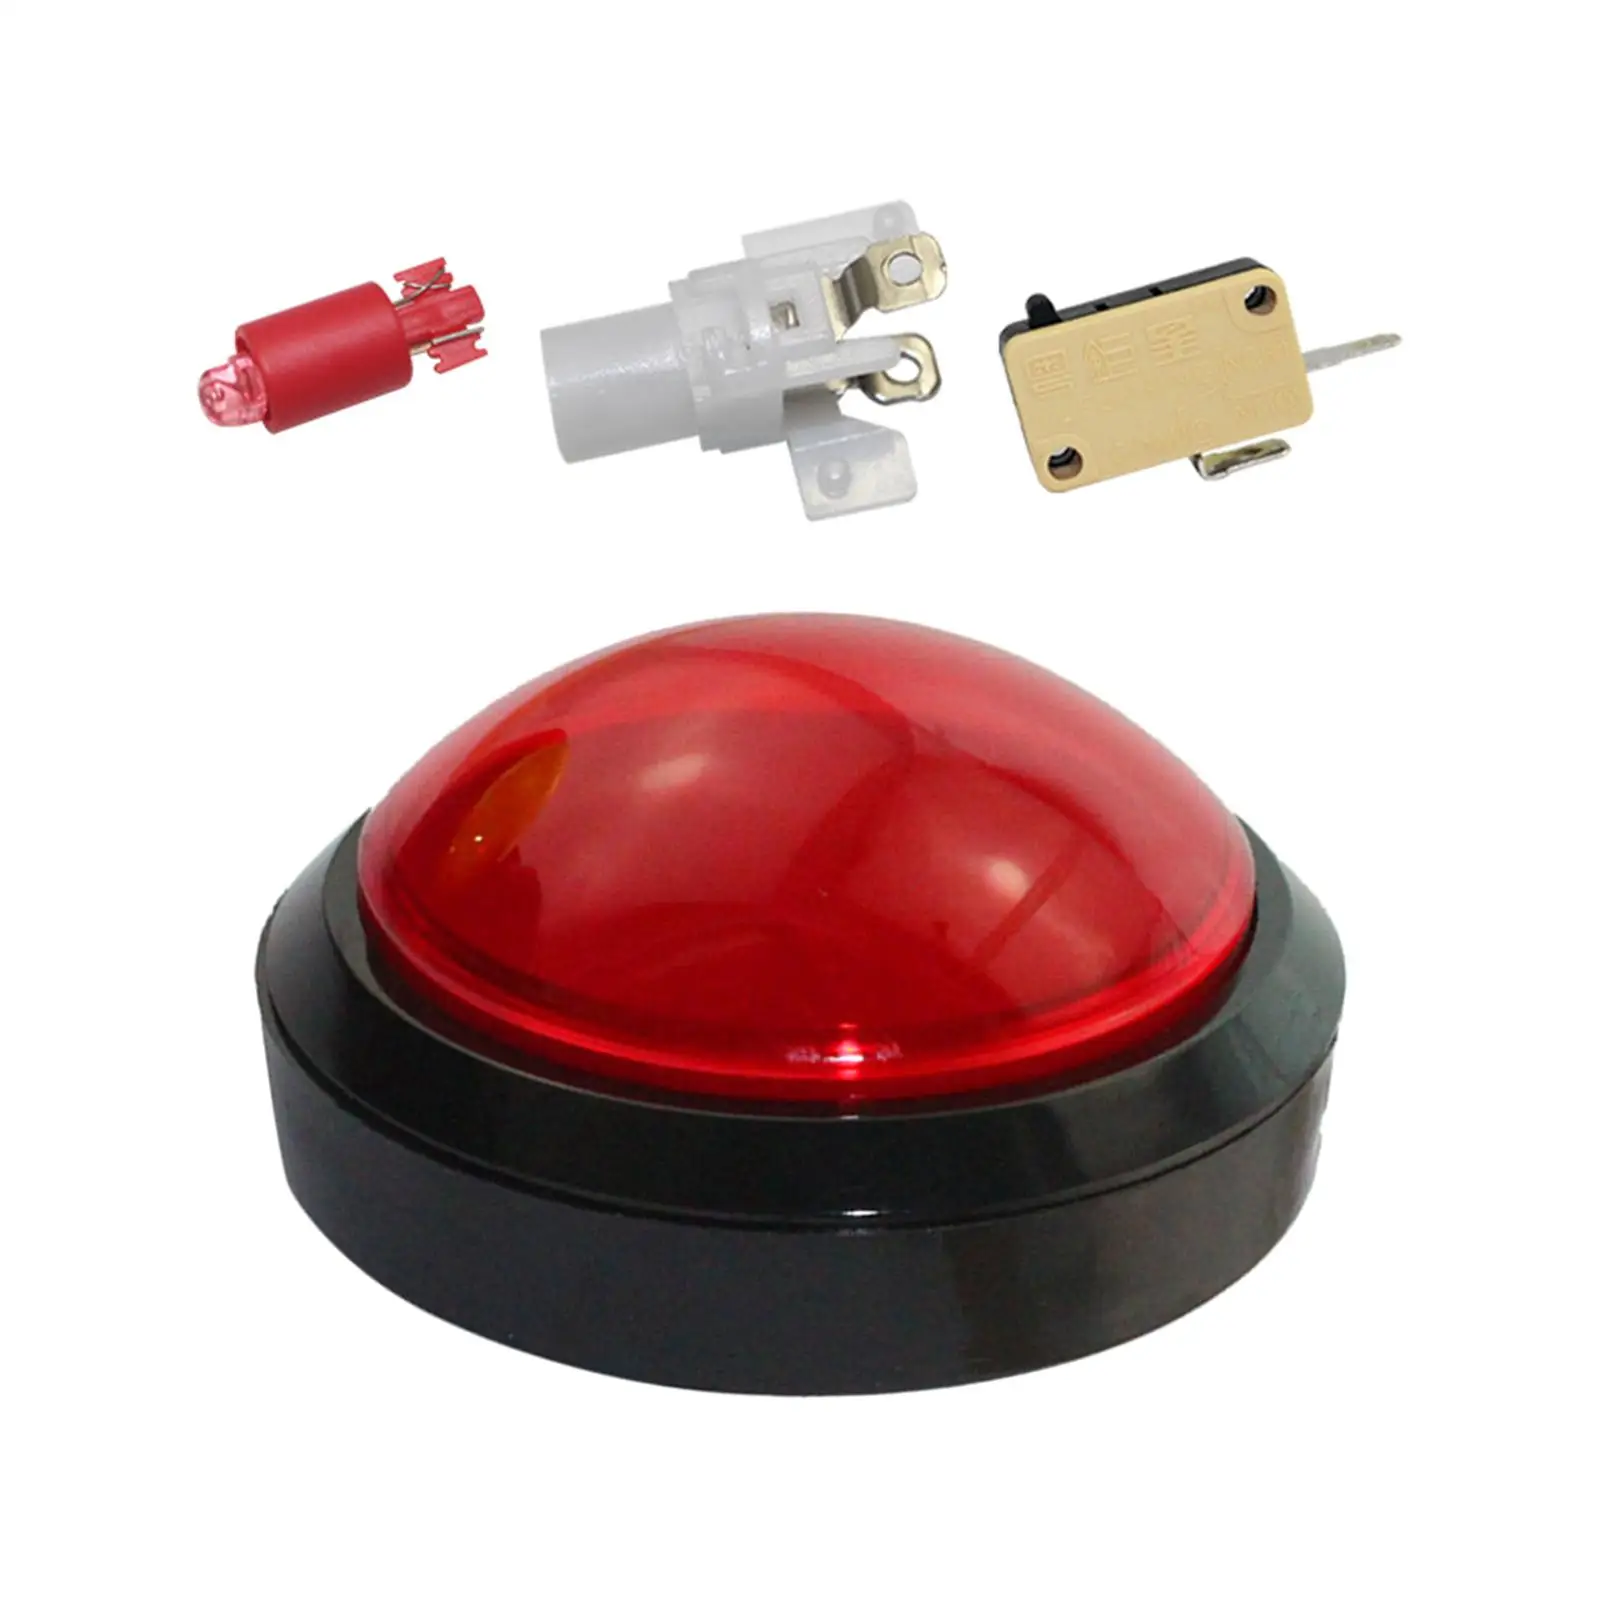 100mm LED Push Button, Accessories for Arcade Machine  Replaces